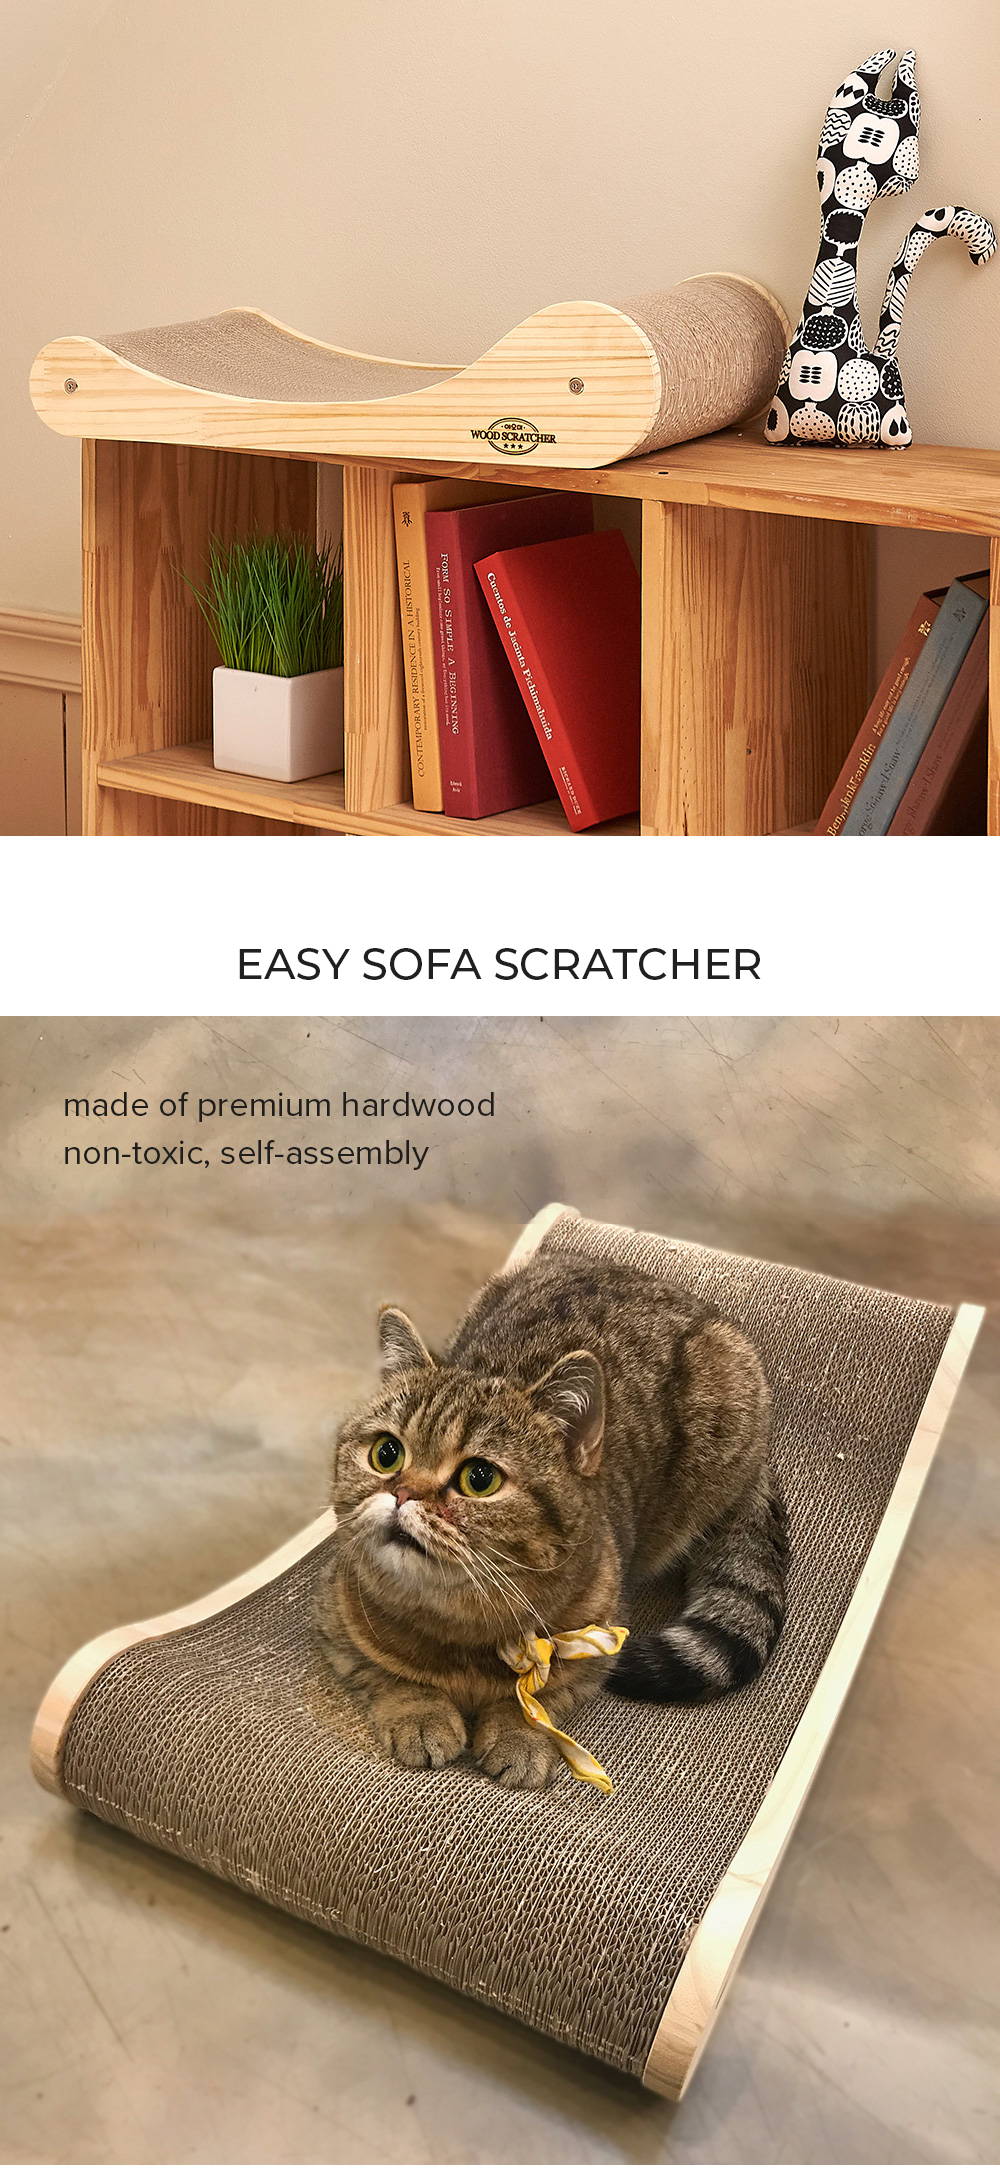 yaomi, cat scratcher, easy sofa scratcher, real hard wood cat scratcher, premium hardwood cat scratcher, replaceable hardwood cat scratcher, replaceable corrugated cardboard, easy to refill, eco-friendly, environment-friendly, non-toxic, furniture design, protect home furniture, relaxing place, releasing stress, strong, high-quality, korean product